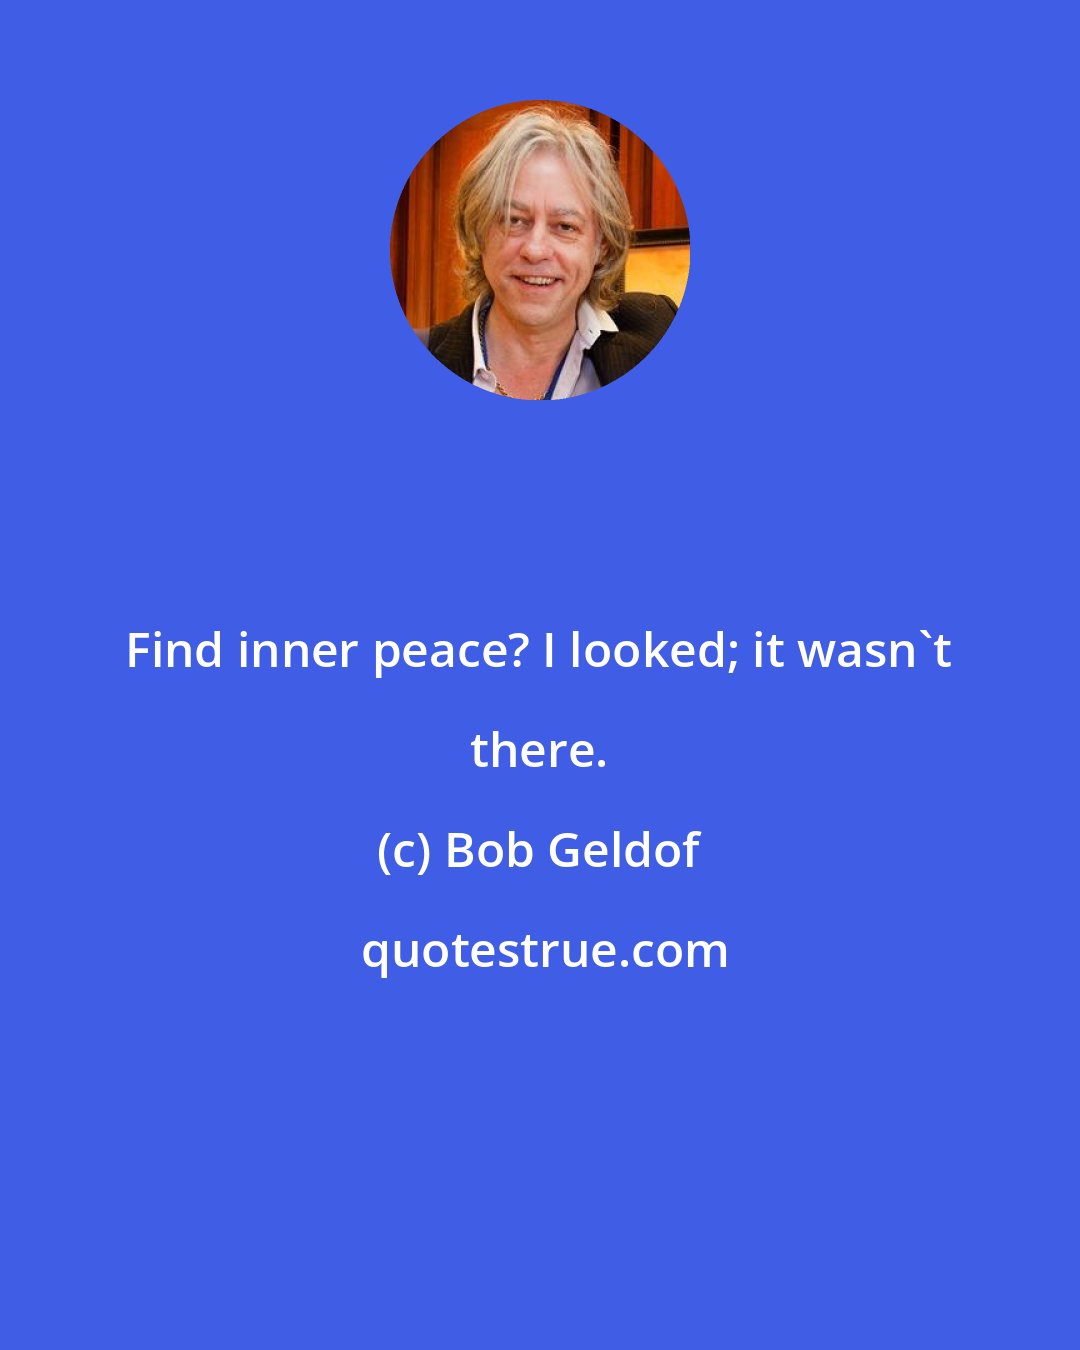 Bob Geldof: Find inner peace? I looked; it wasn't there.